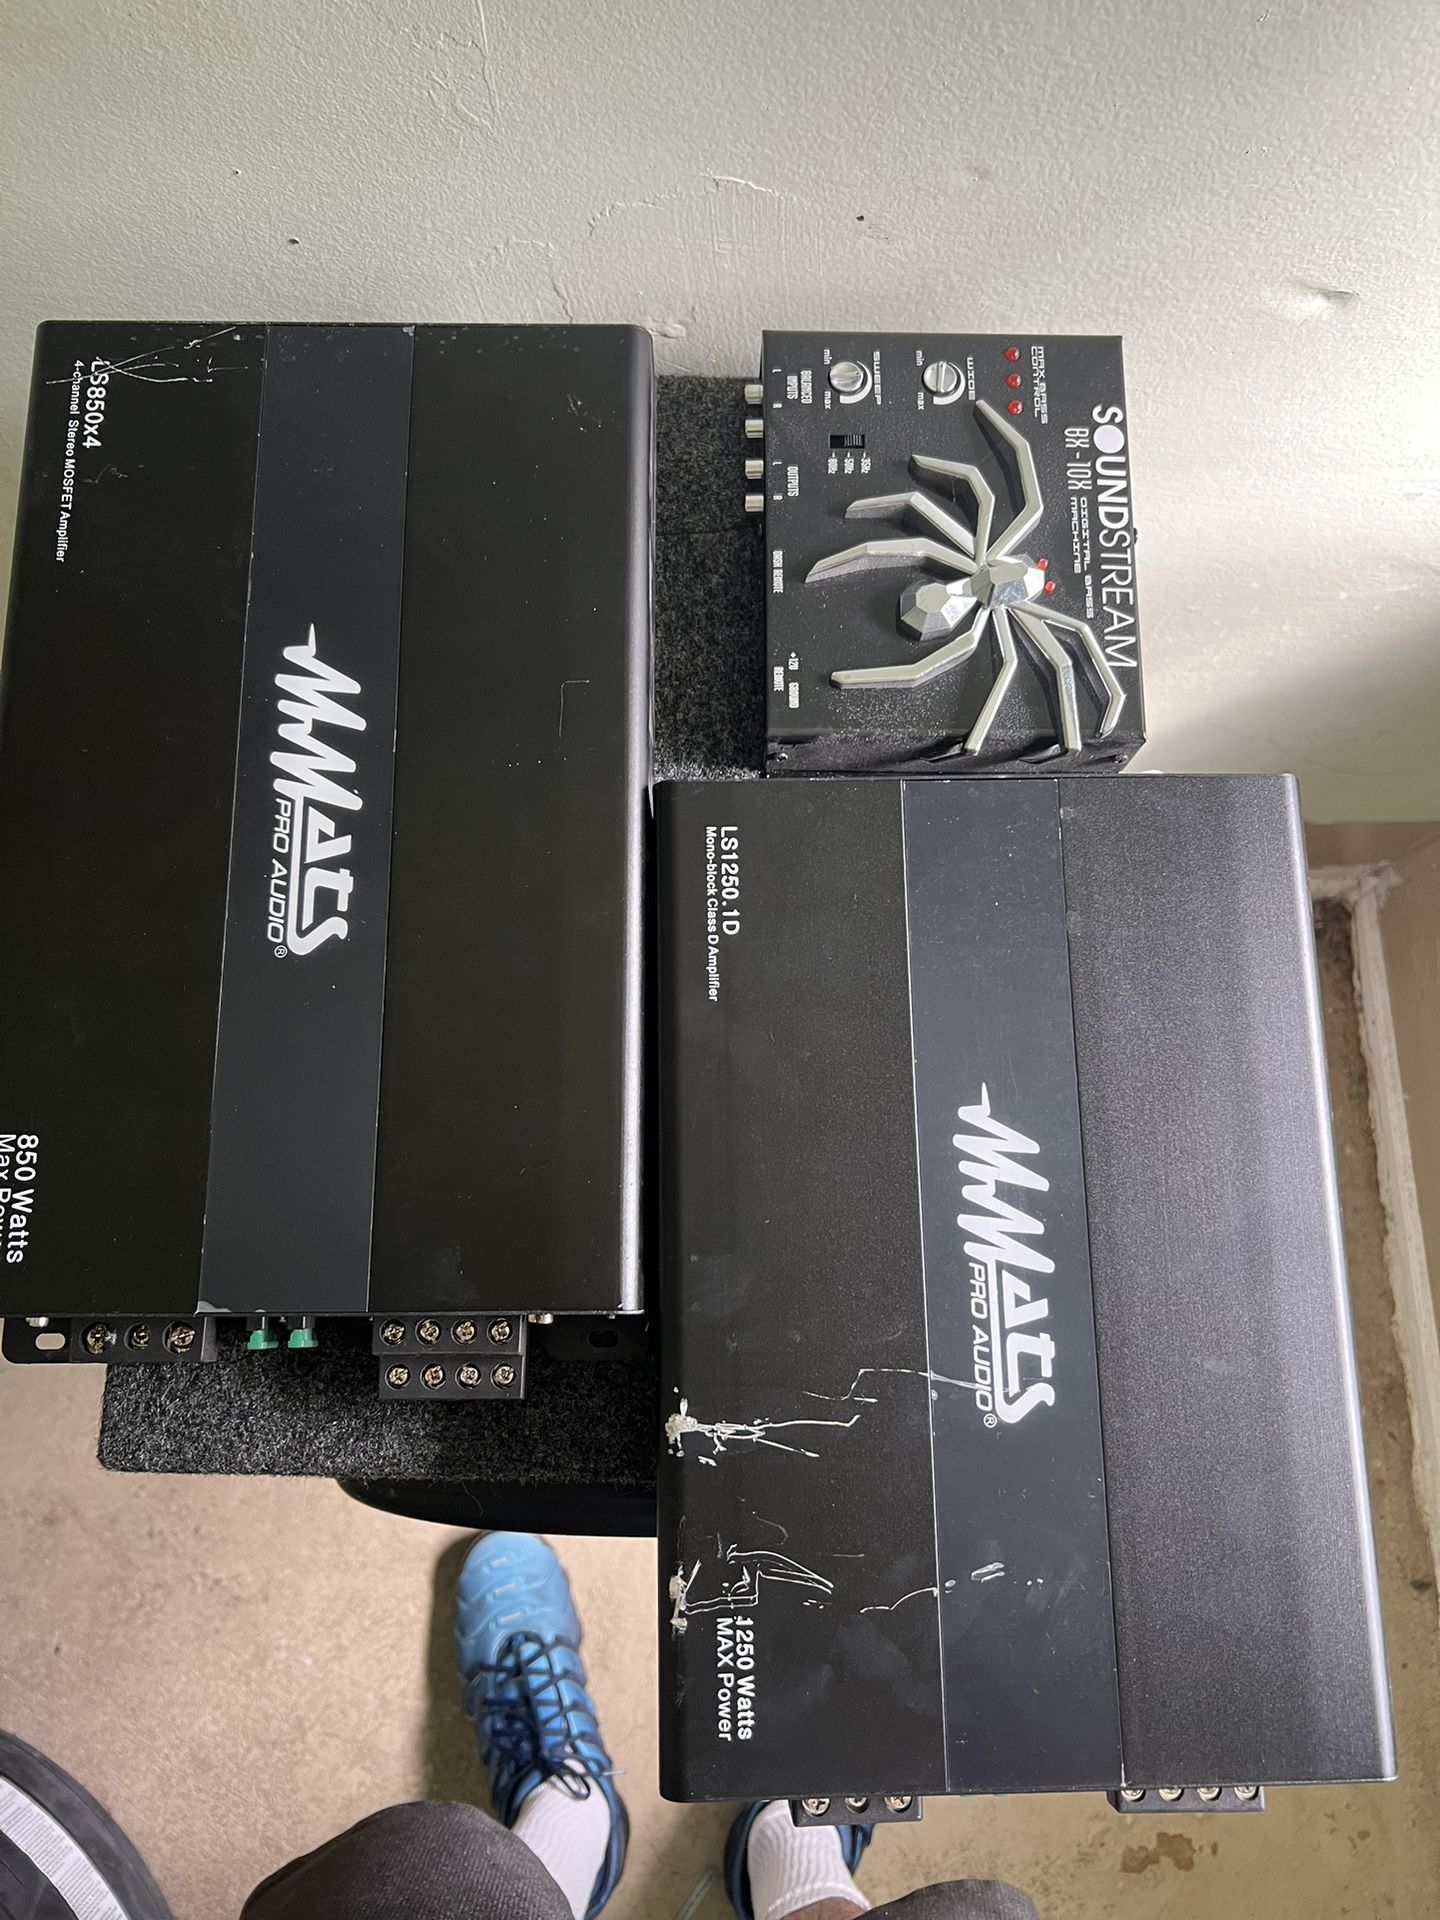 Amps For Sale 